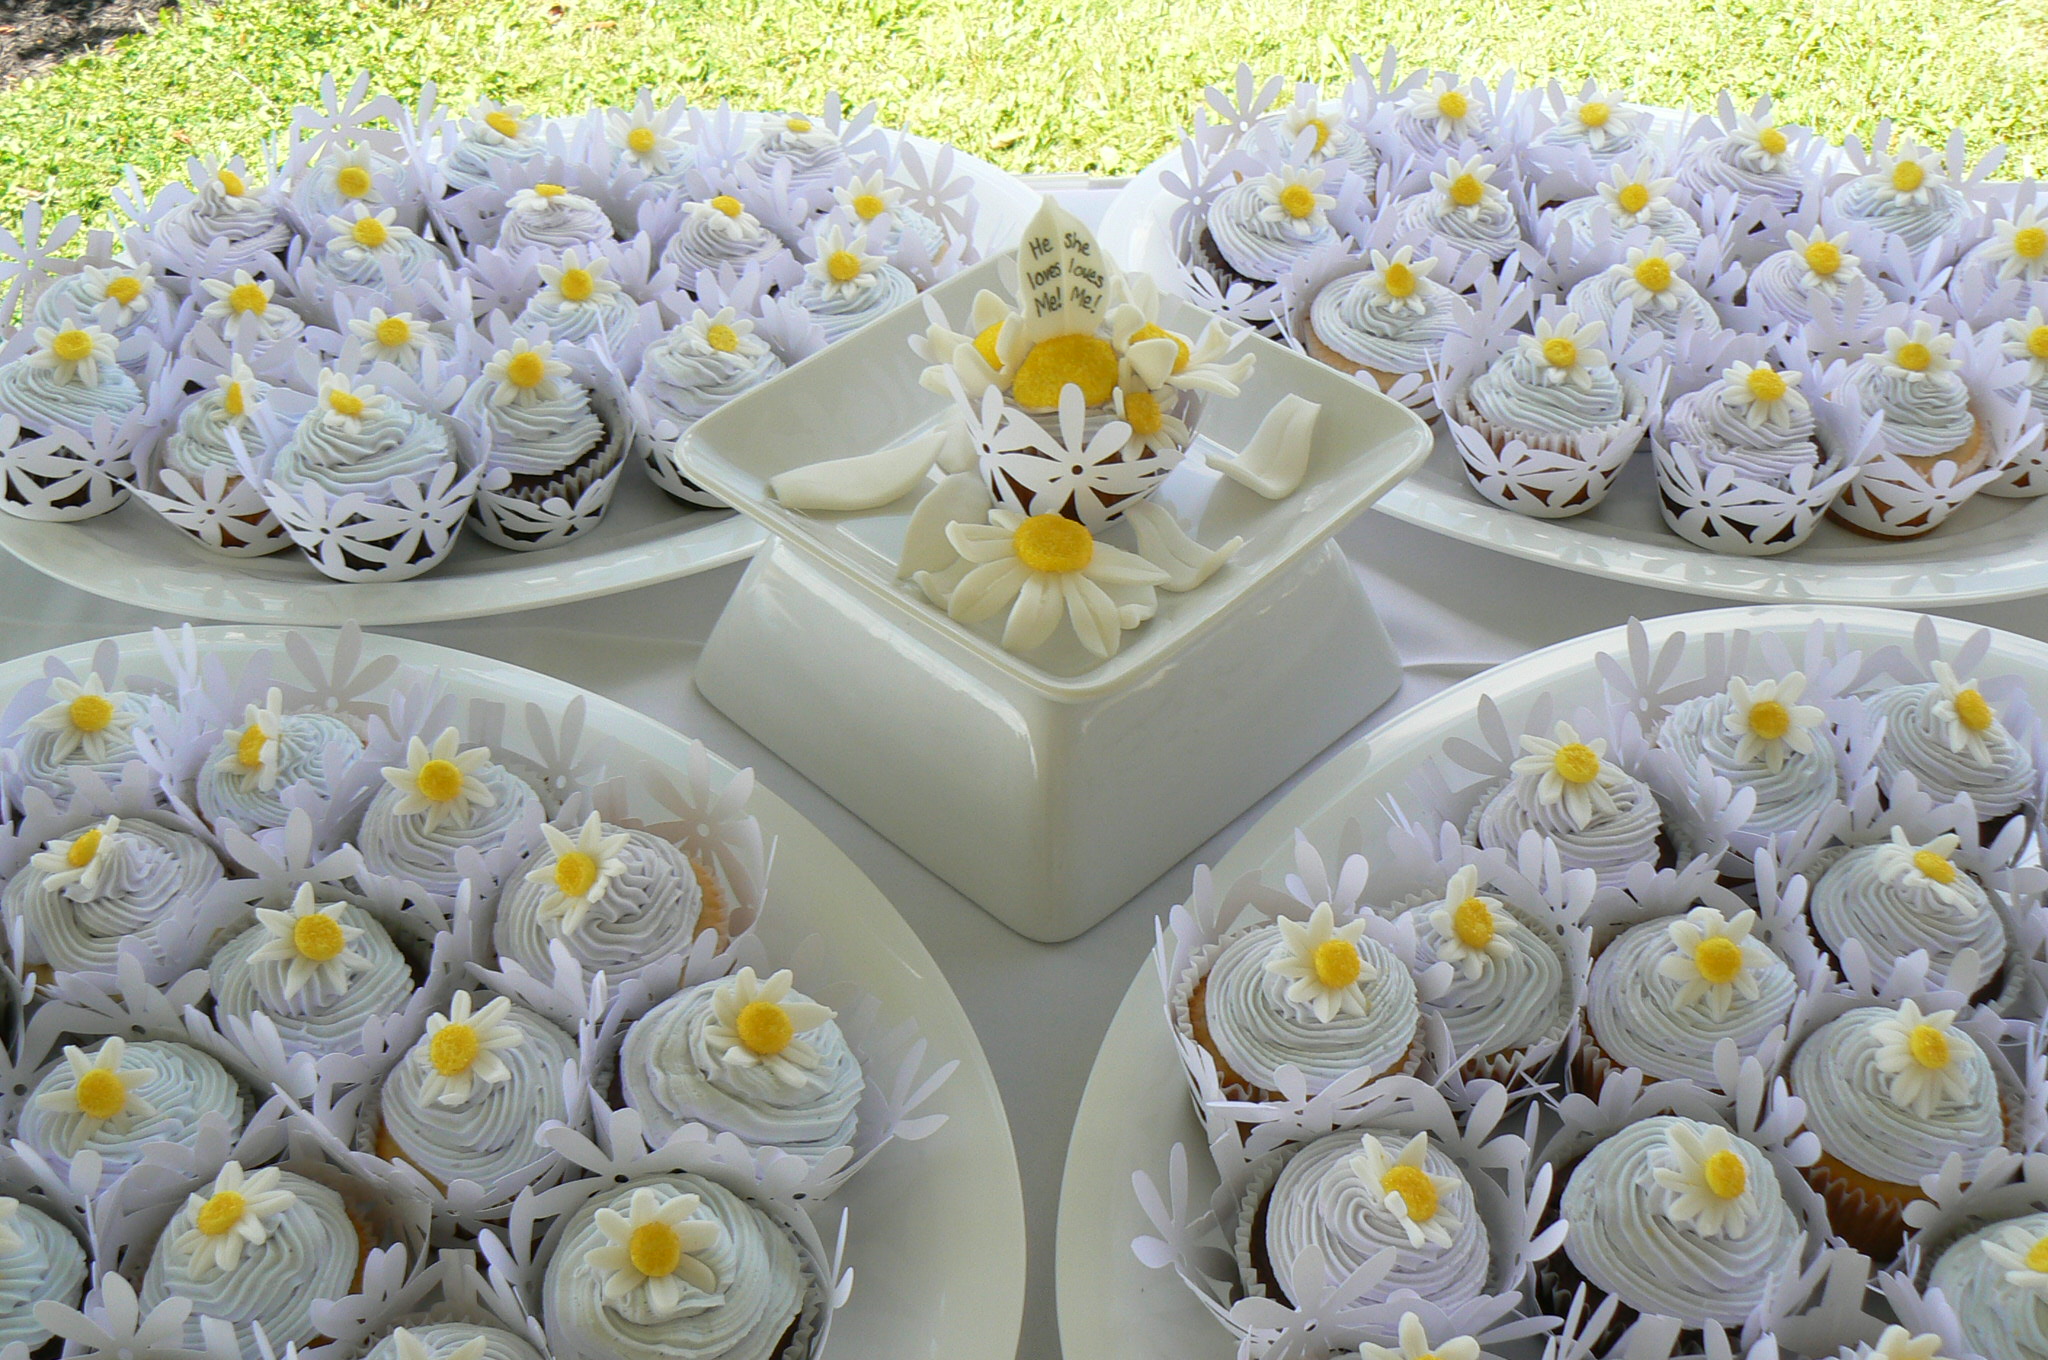 Wedding Cupcakes with Daisies